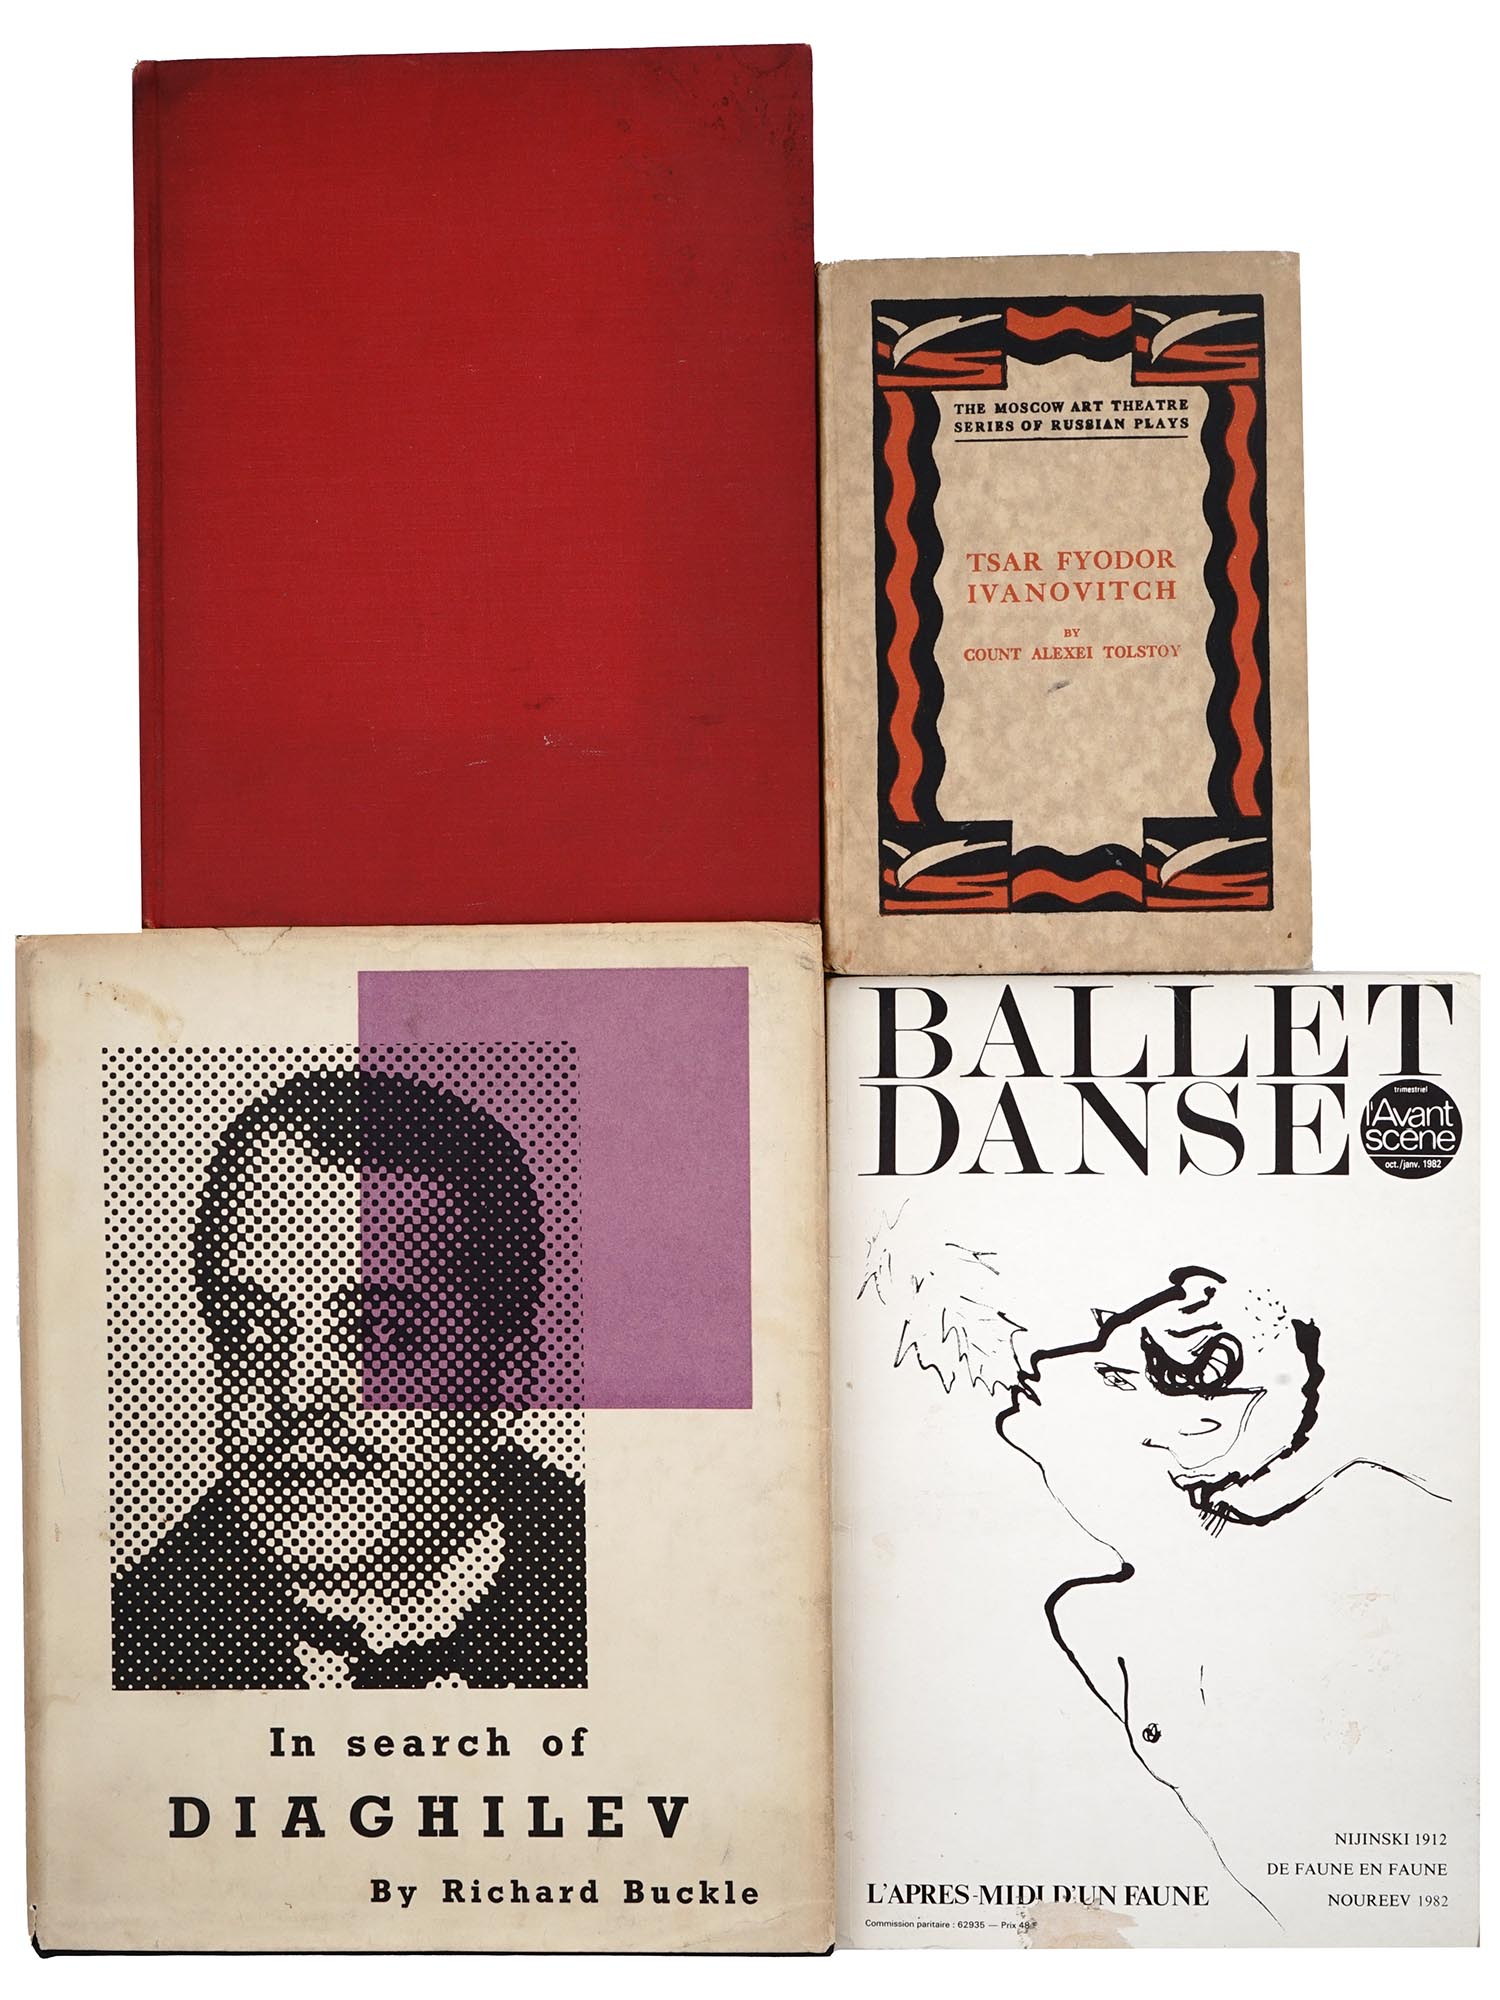 BOOKS ABOUT BALLETS RUSSES AND SERGEI DIAGHILEV PIC-0